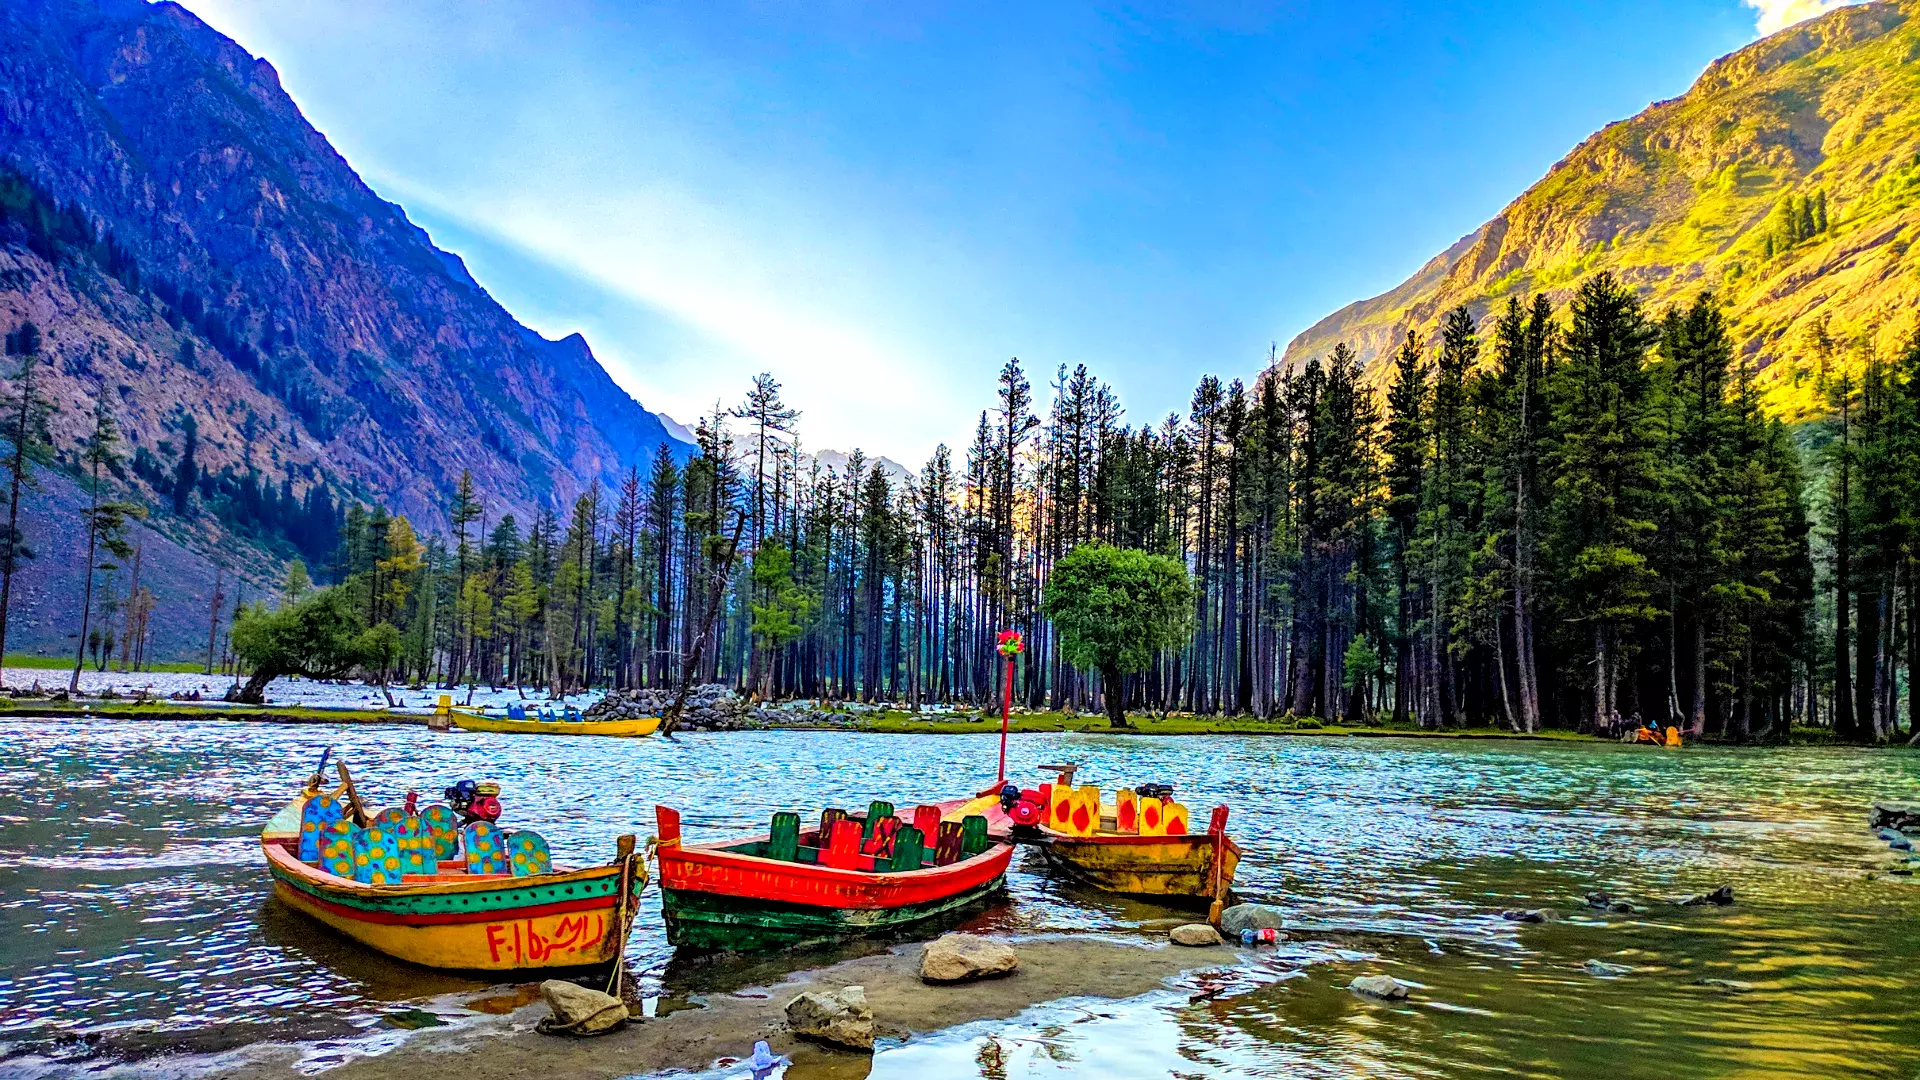 Panoramic view of boats floating on Mahodand Lake in Swat Valley, Pakistan.